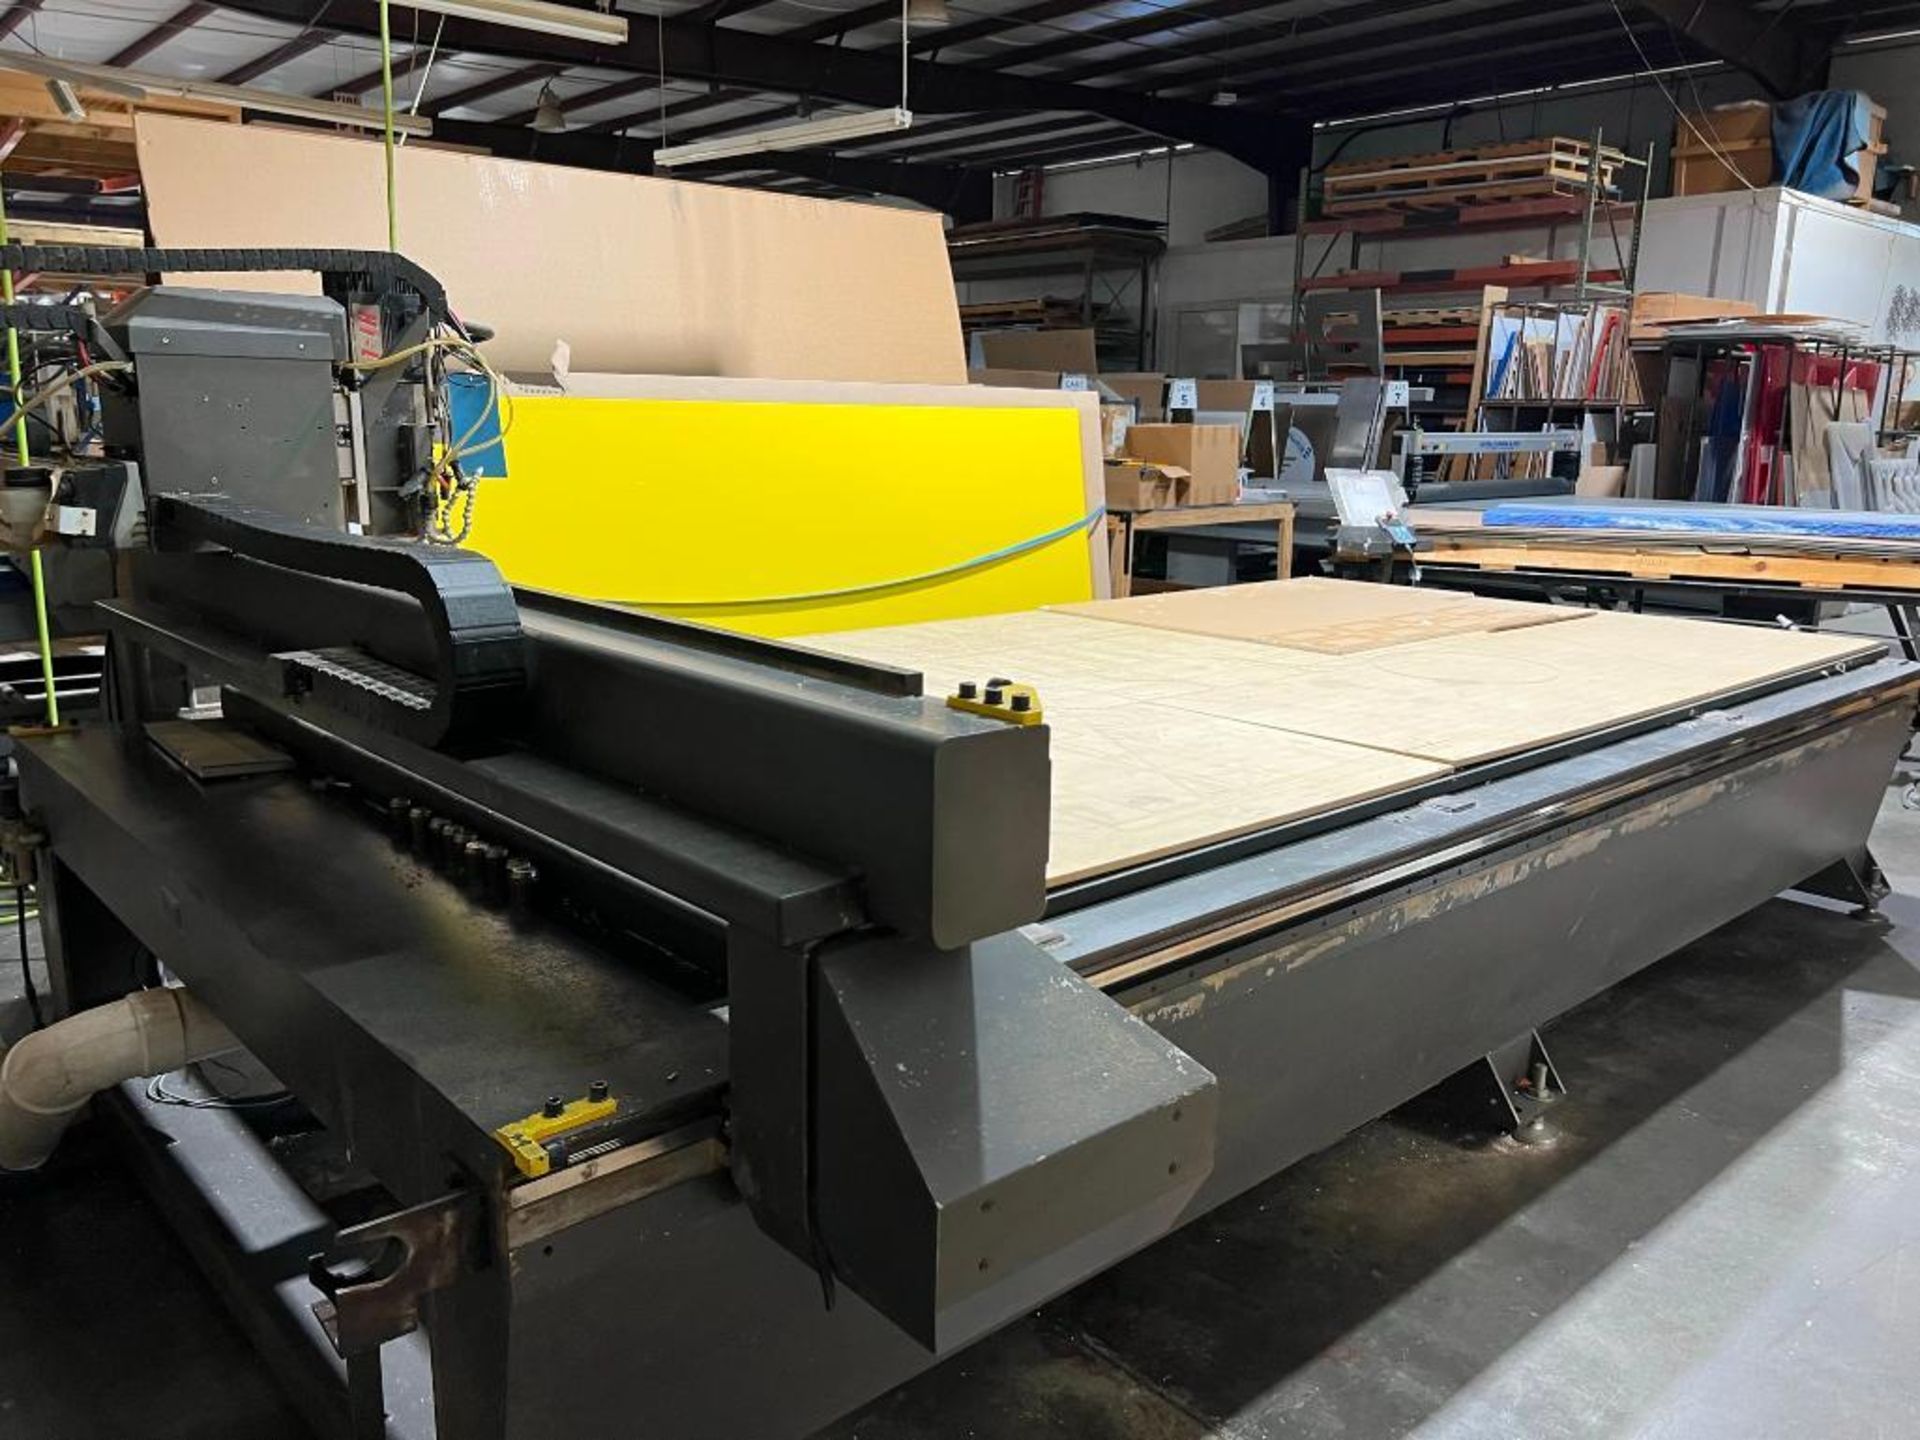 Multicam CNC Router Model 3305-R, S/N 3-305-R05361, 6' x 12' Table, with Tooling, Pendant Controls, - Image 9 of 16